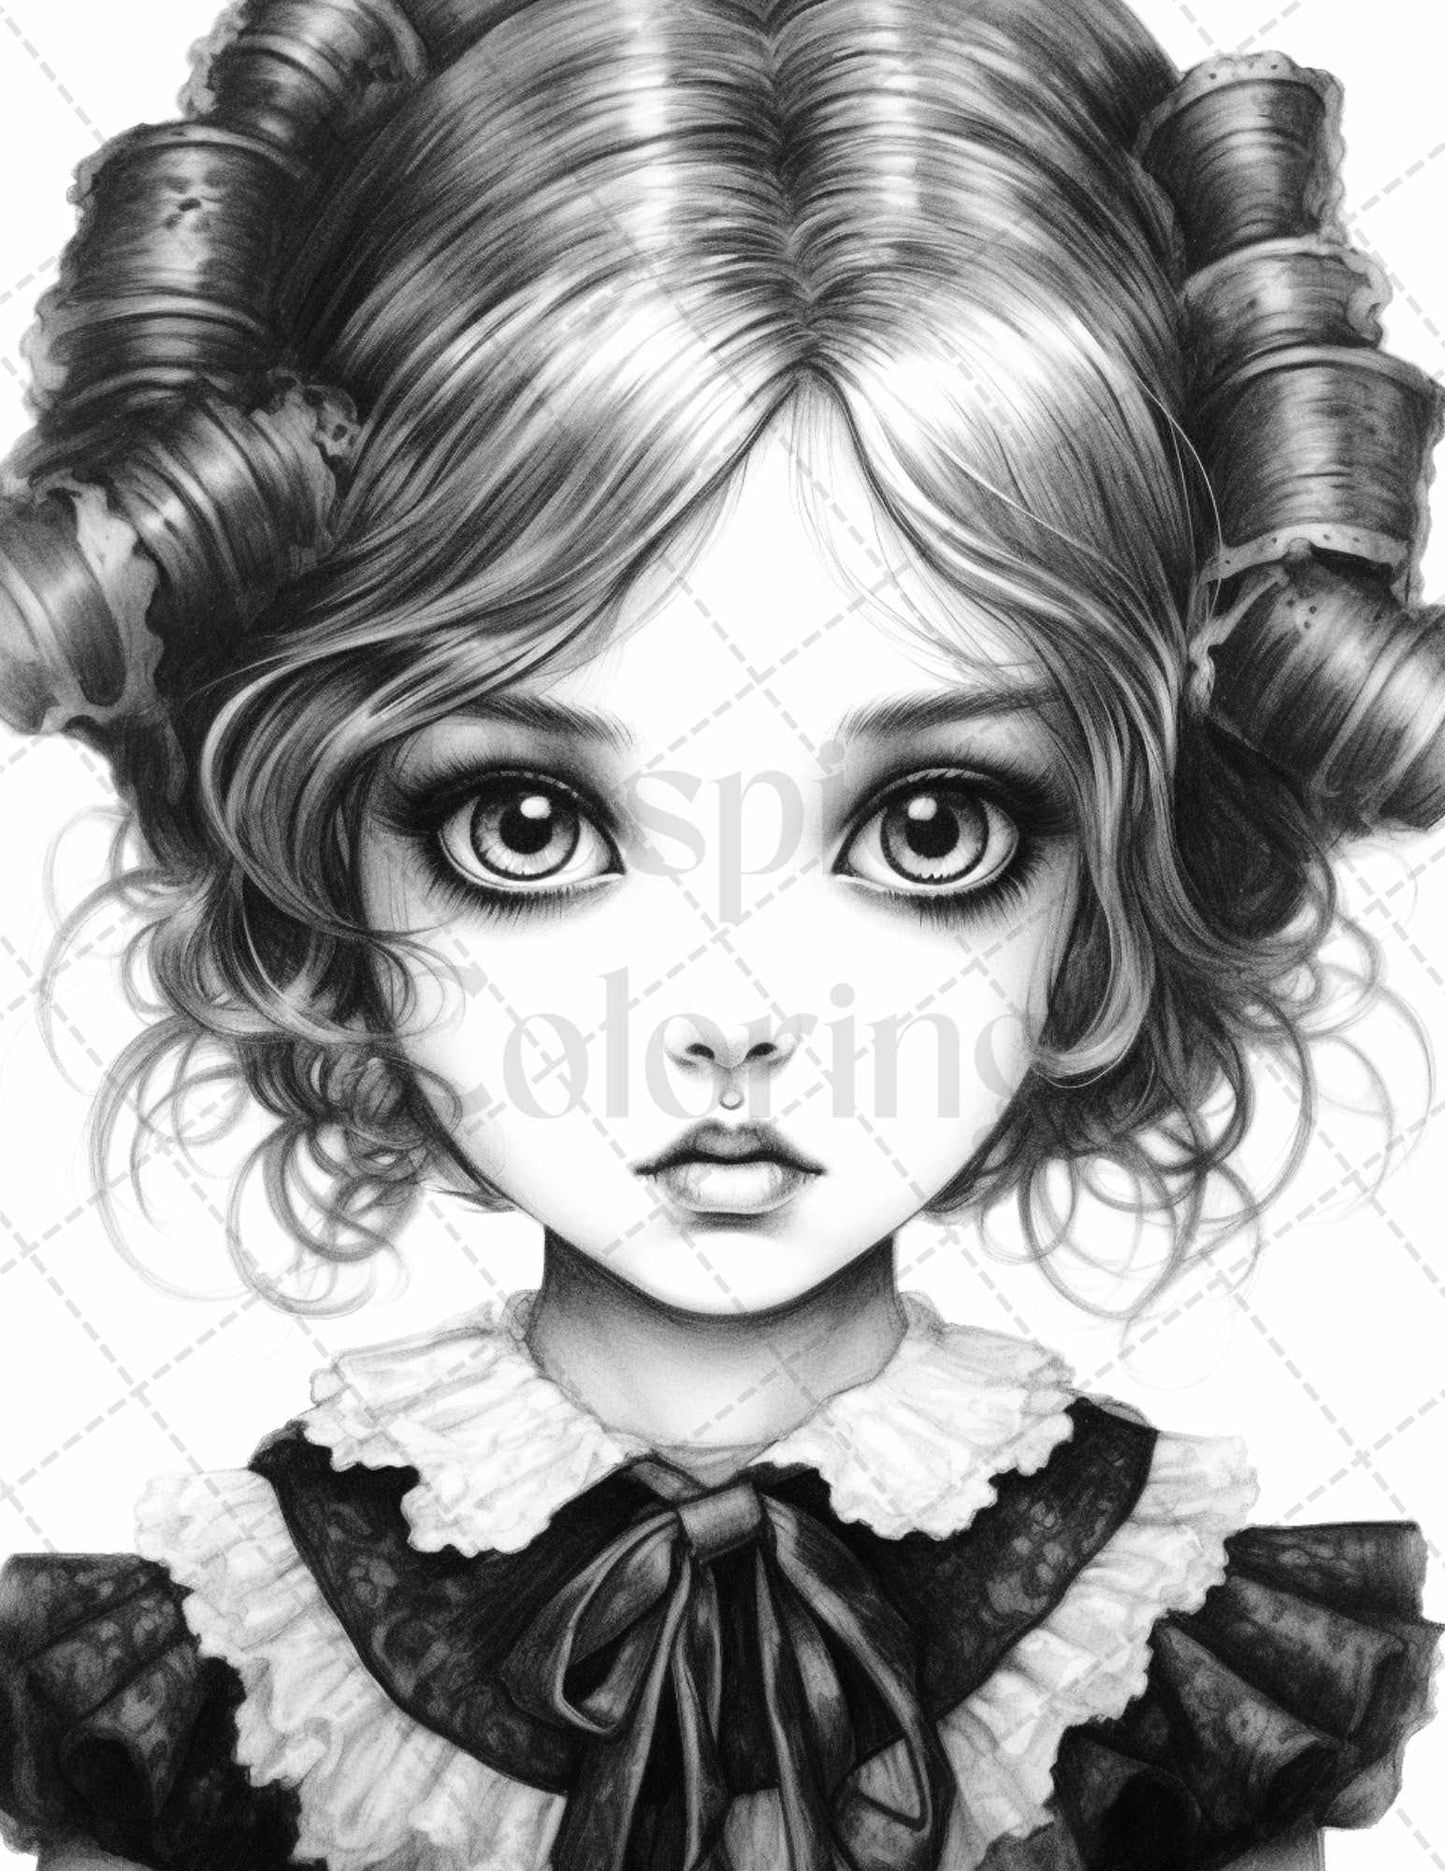 grayscale coloring pages, gothic girls, printable for adults, instant download, gothic art, grayscale illustrations, coloring book, dark art, printable pages, adult coloring, portrait coloring pages for adults